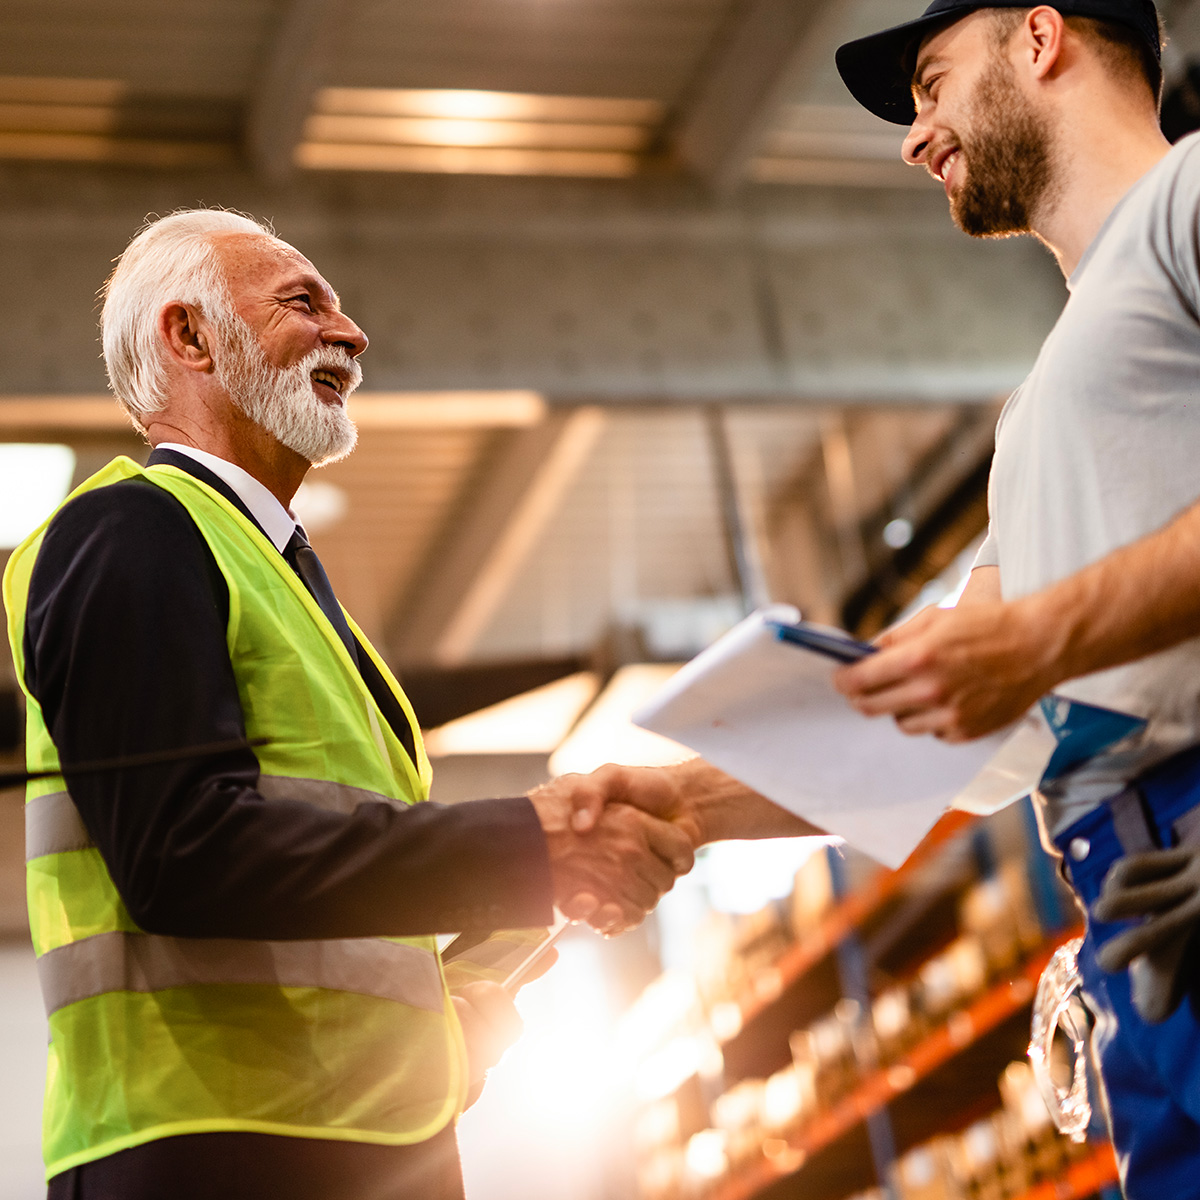 Two men in warehouse setting shaking hands over maintenance agreement